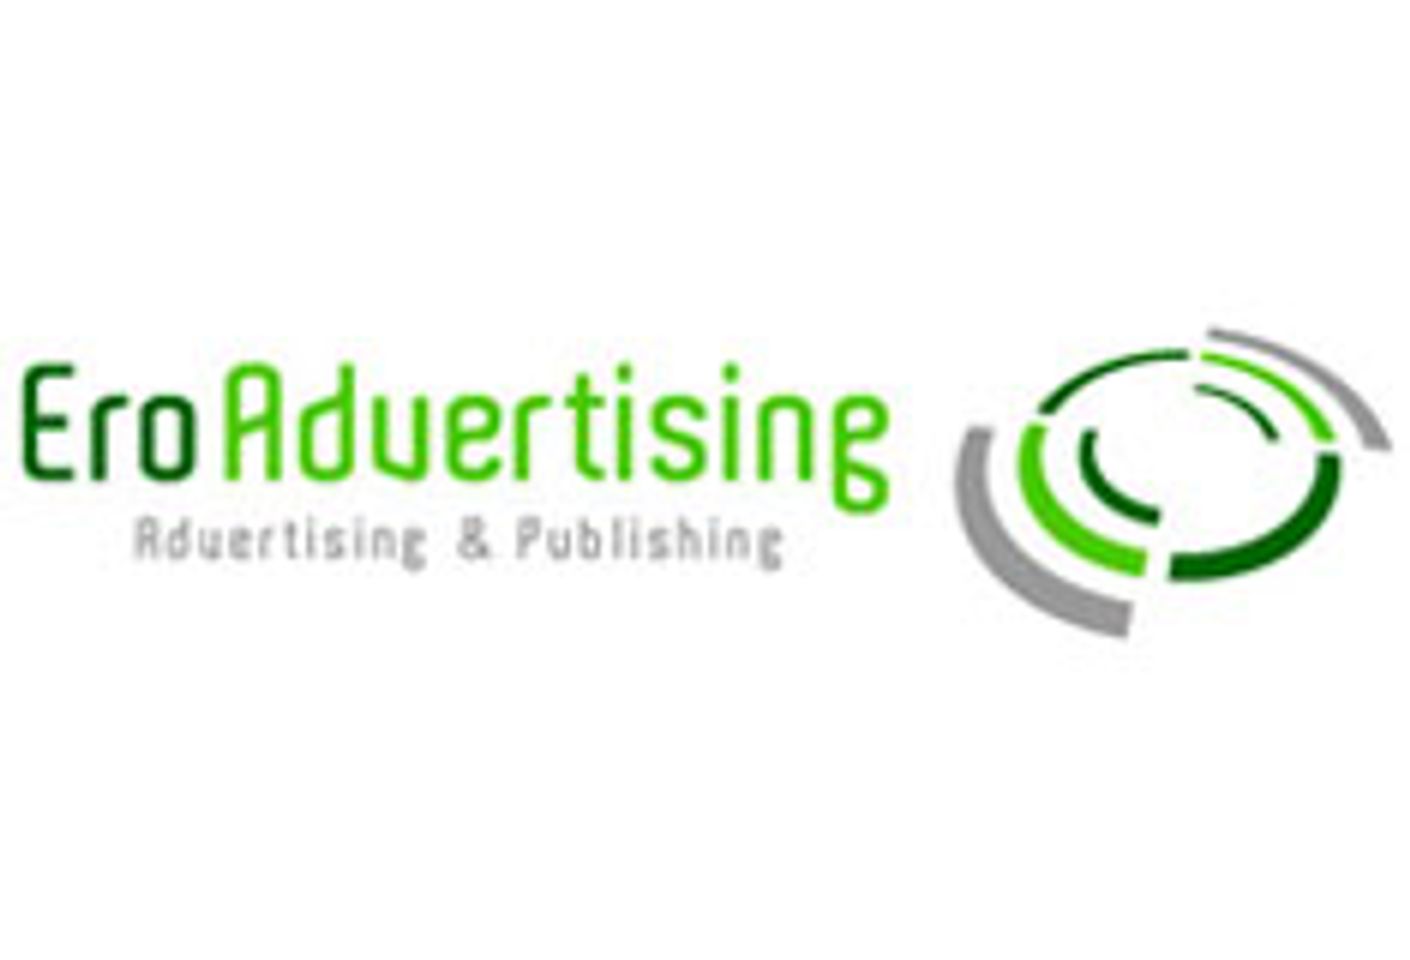 EroAdvertising Introduces Mobile Redirects